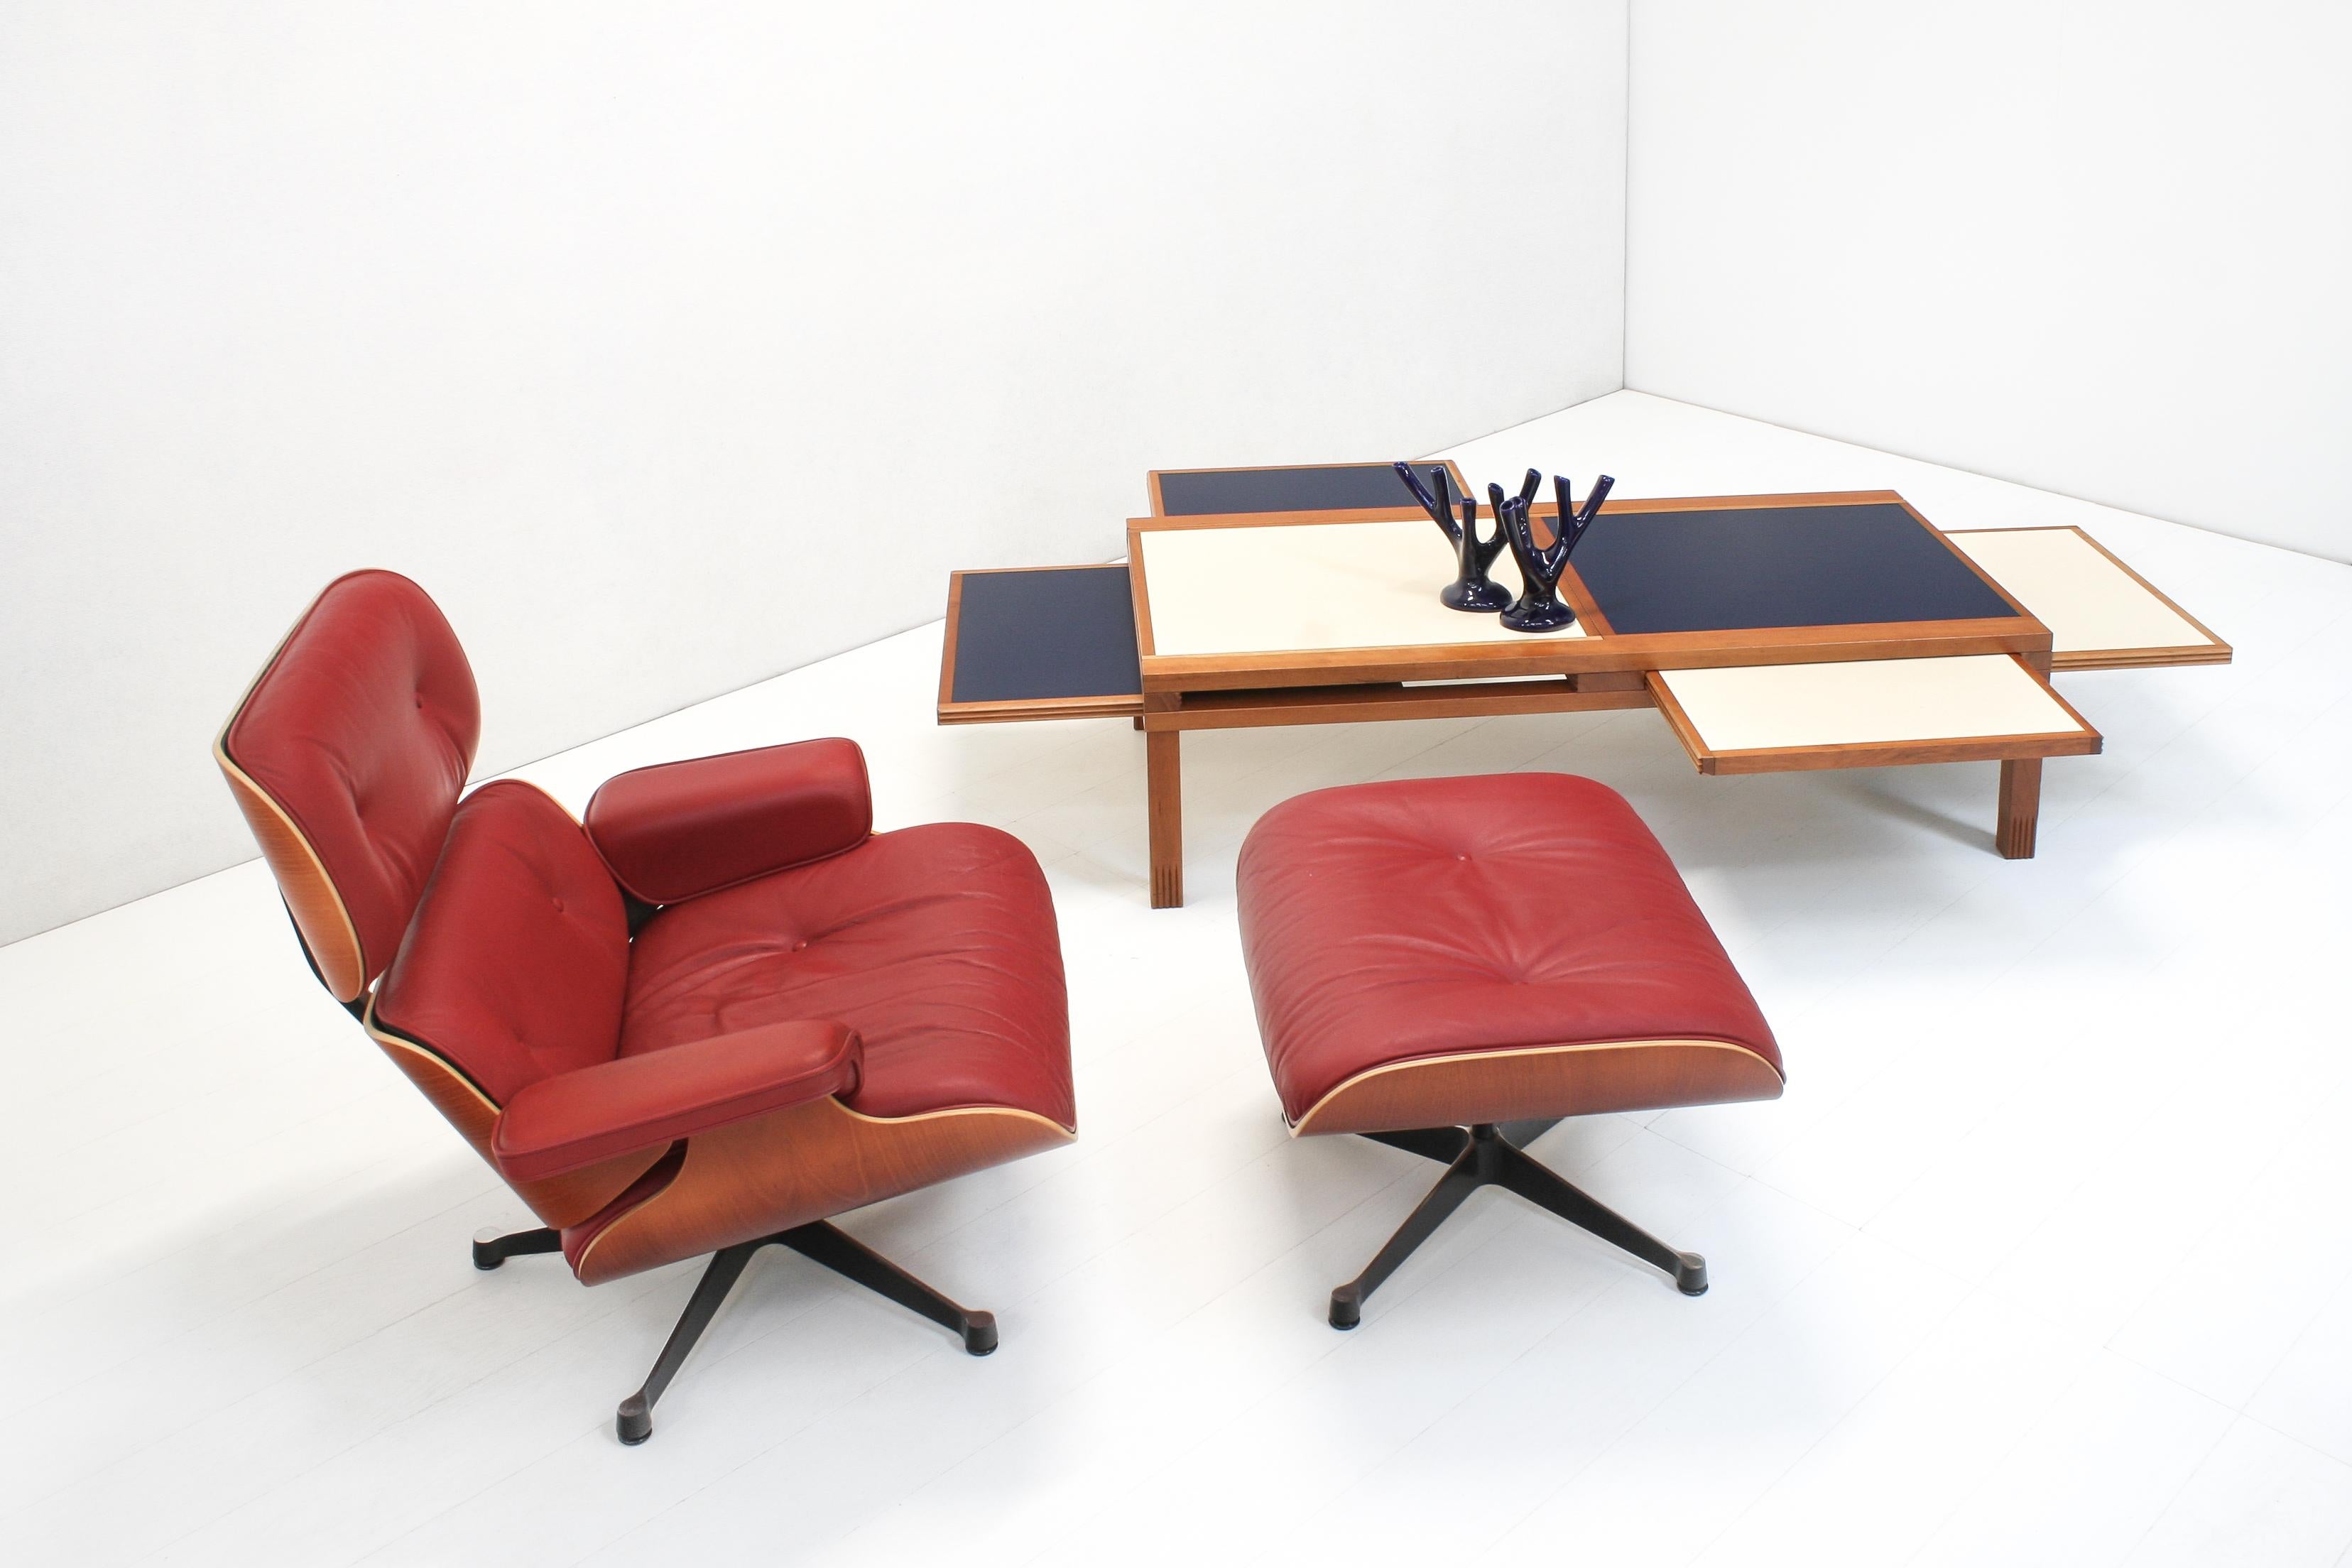 The iconic 670 lounge chair with the 671 hocker designed by Charles Eames for Herman Miller in 1956. A beautiful design classic with fantastic seating comfort.

This set was produced by Vitra and purchased in 2004. 
It has matching cherry veneer